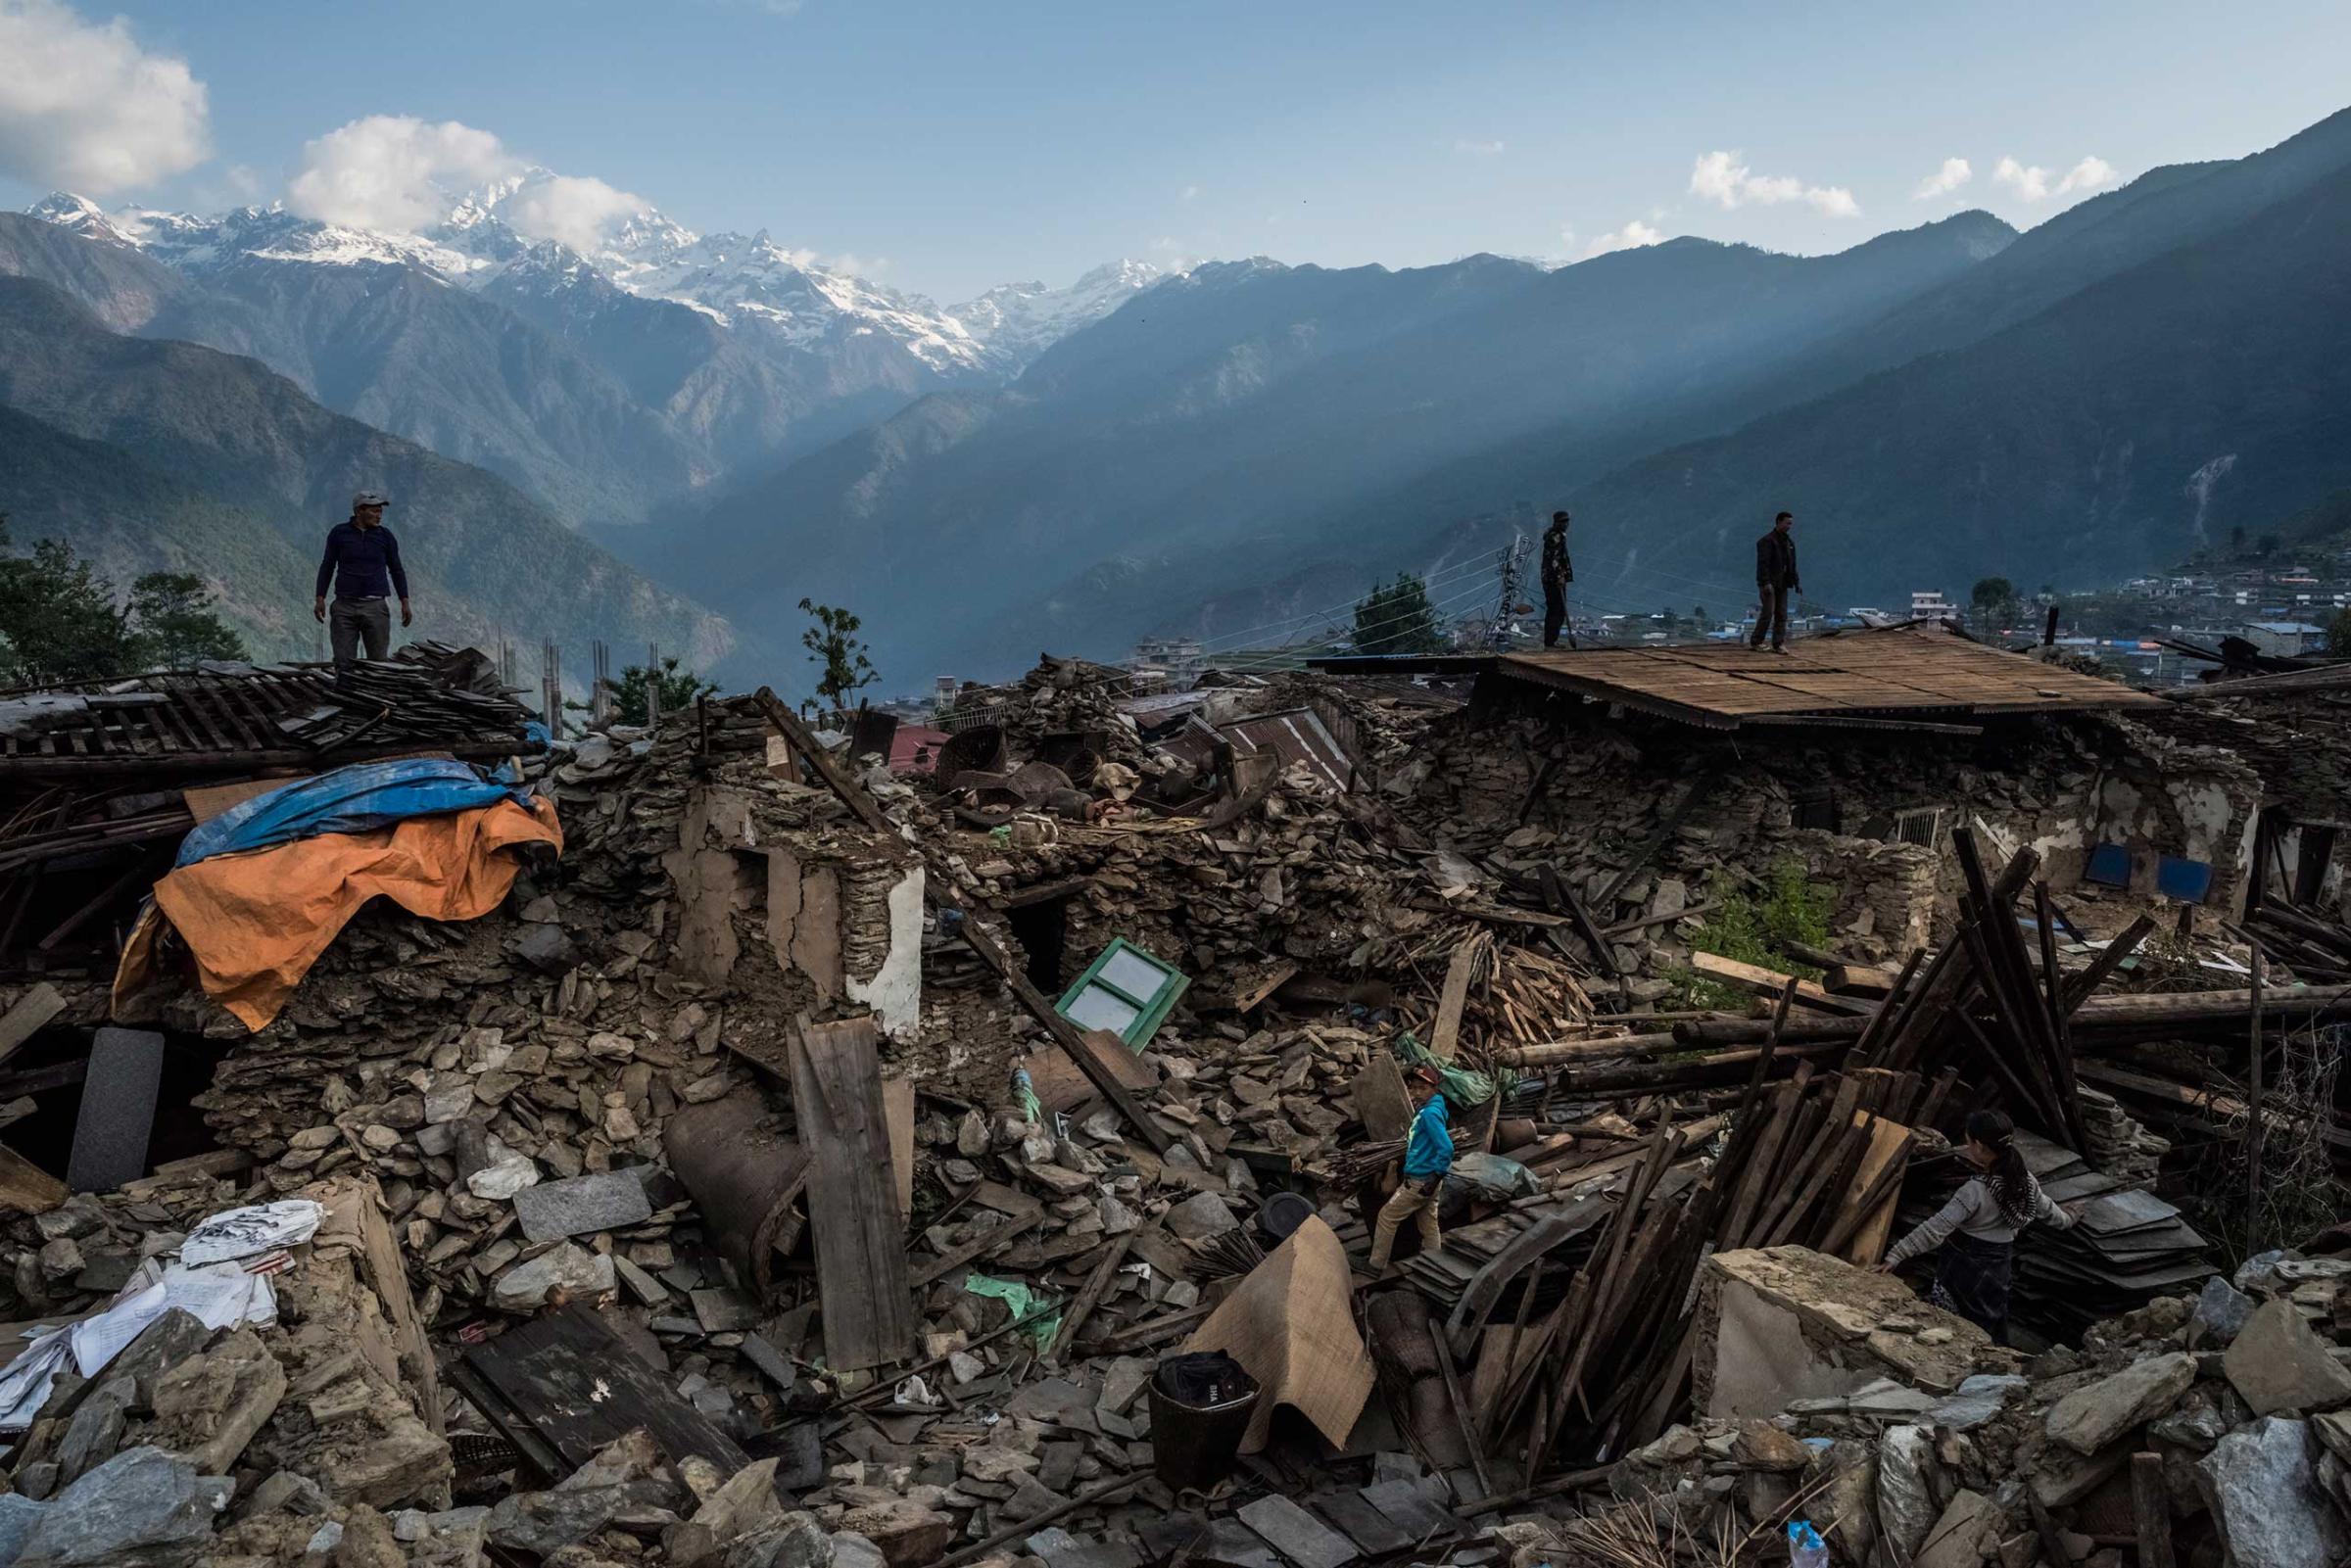 Residents searching for salvageable items in their earthquake-destroyed home in the village of Barpak, Nepal, the epicenter of the April 25 earthquake. May 6, 2015.